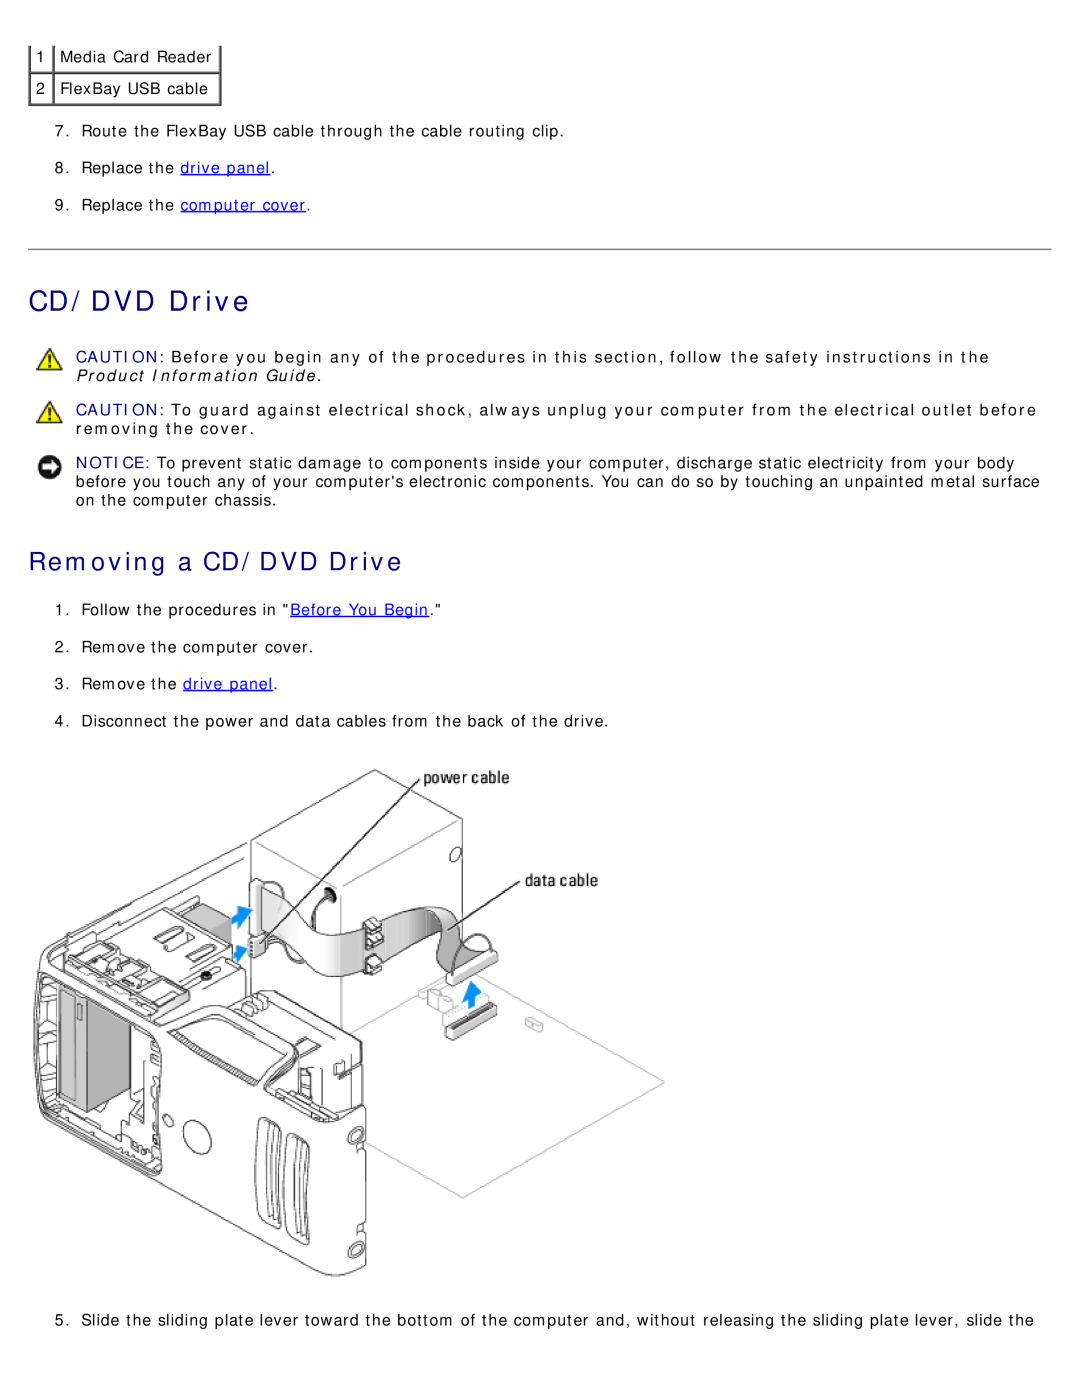 Dell DCSM manual Removing a CD/DVD Drive, Replace the computer cover 